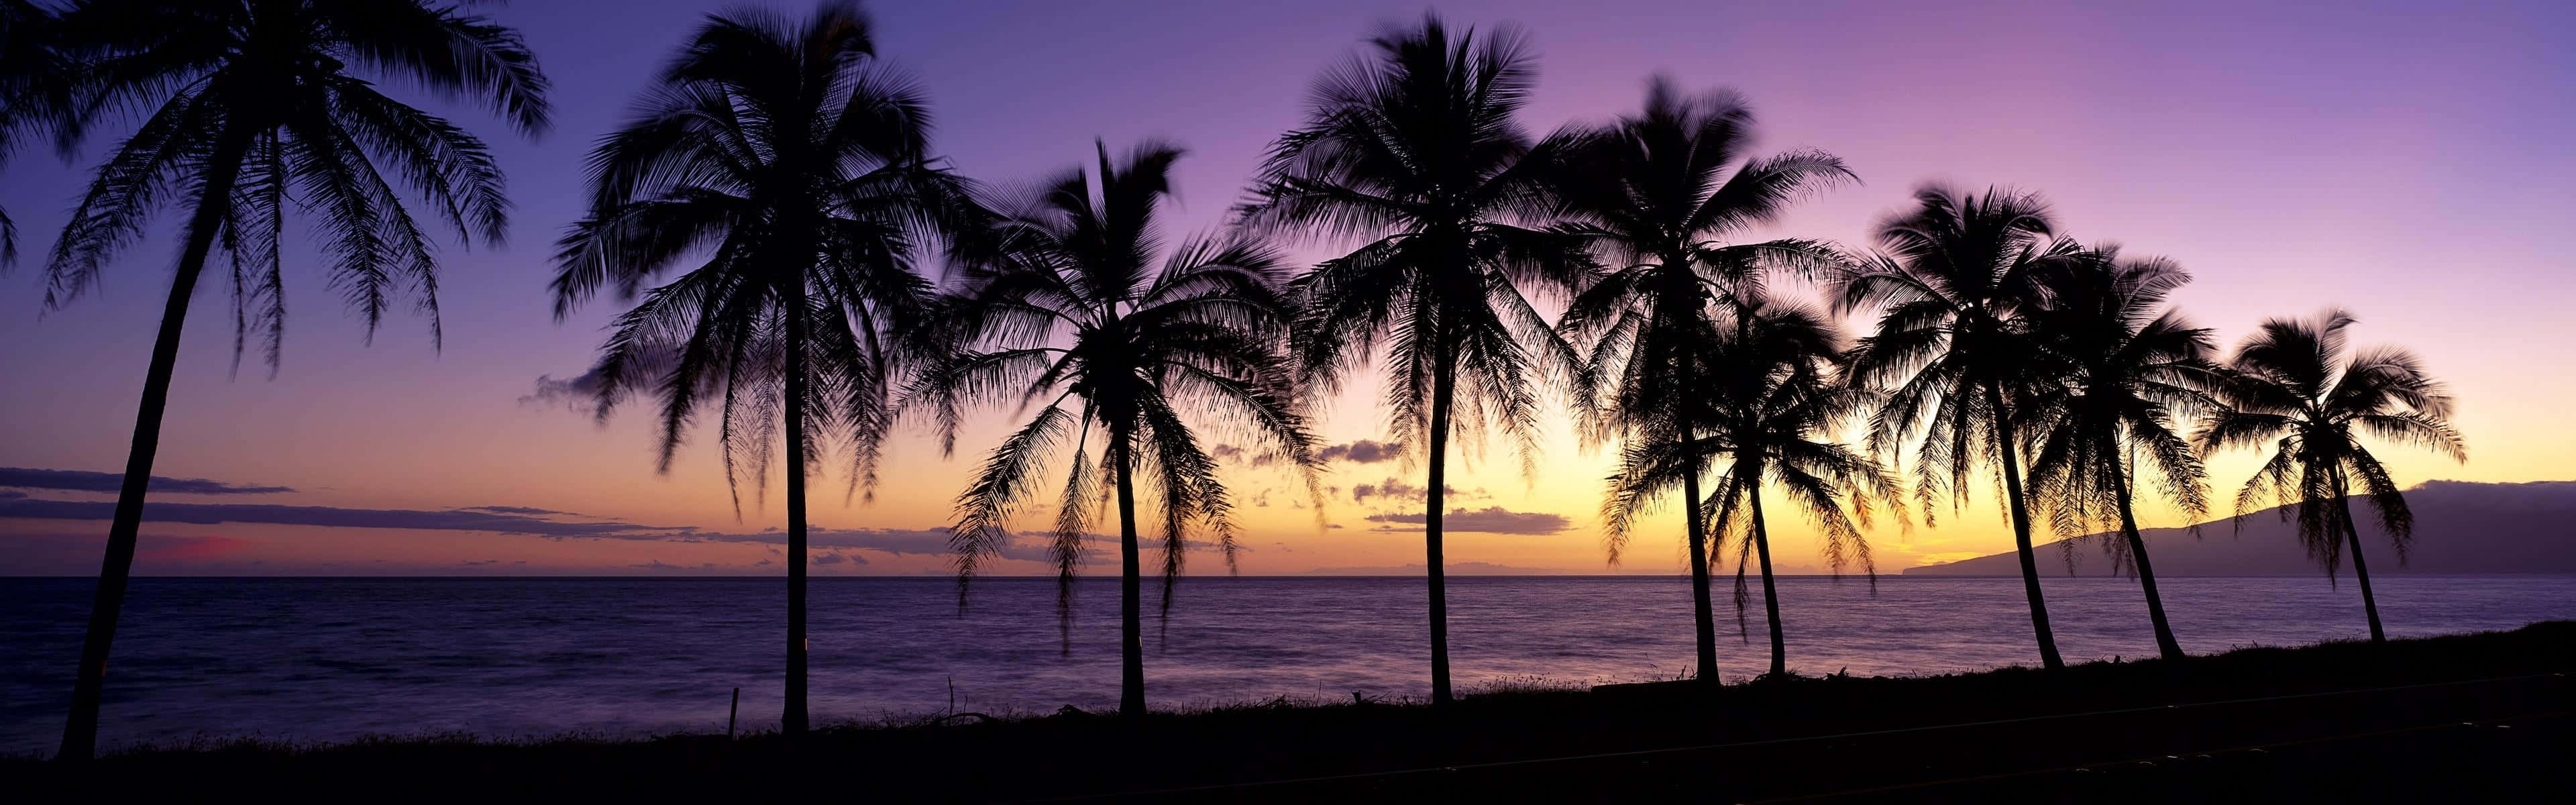 Purple Sky And Palm Trees As A Panoramic Desktop Background